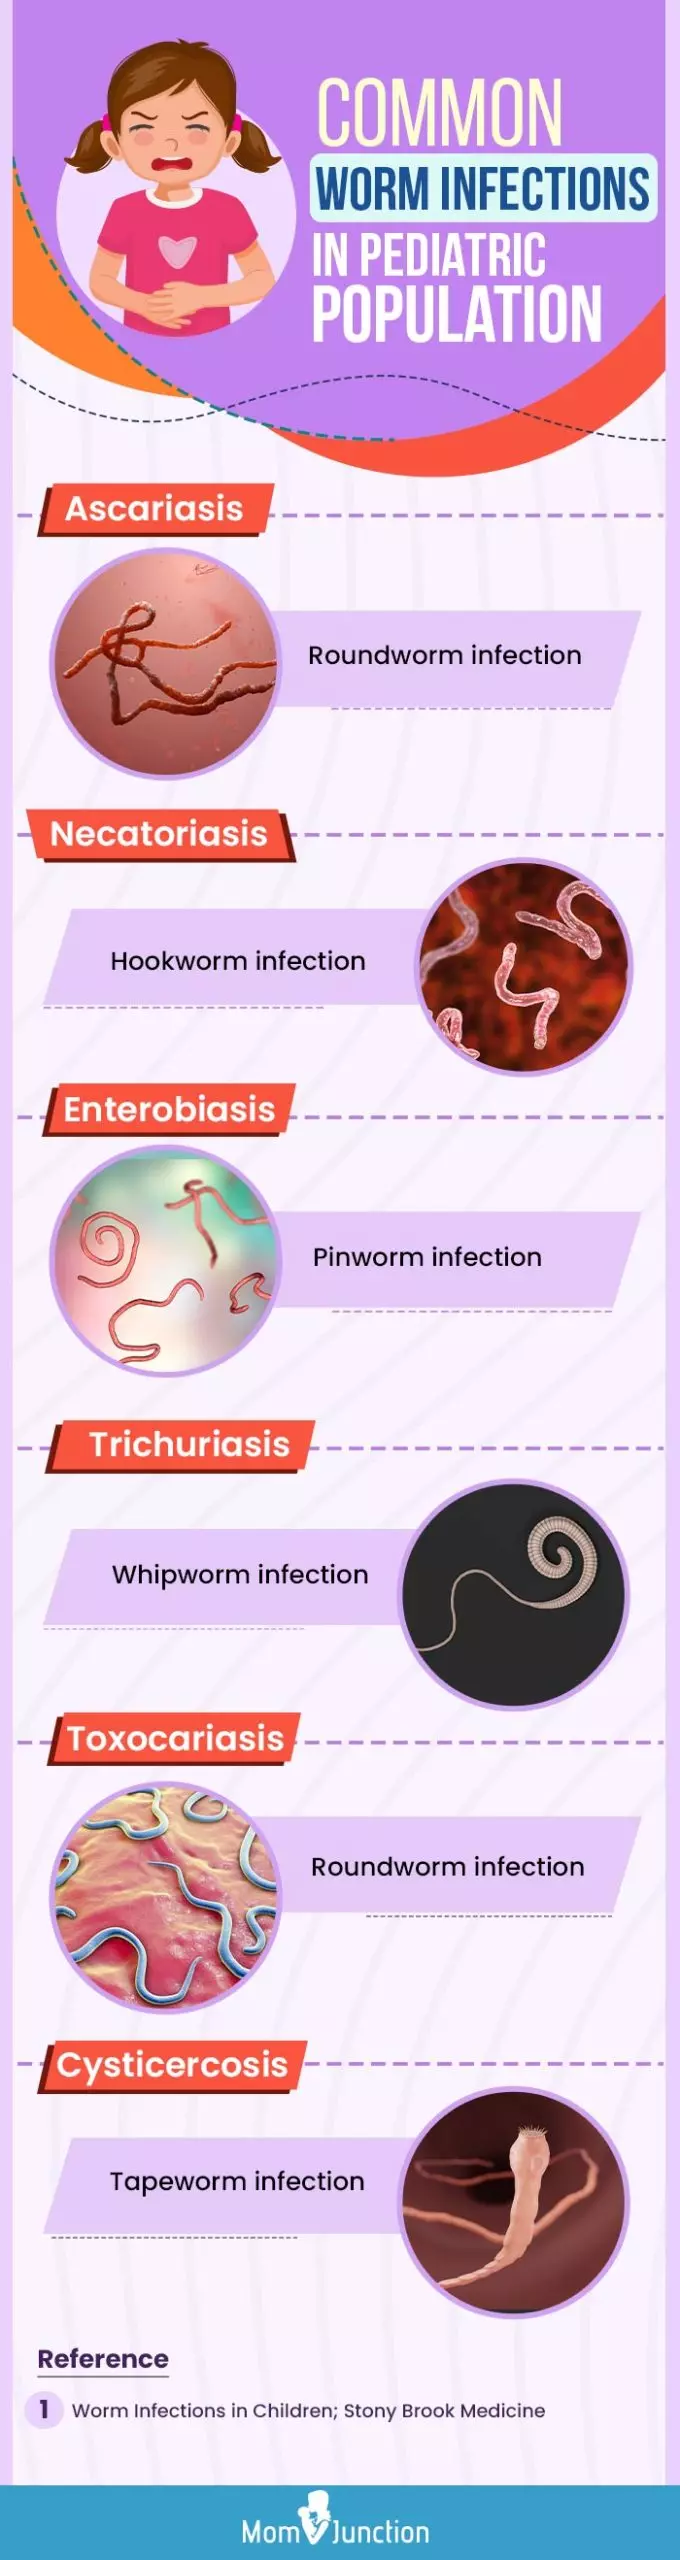 worm infections in children (infographic)